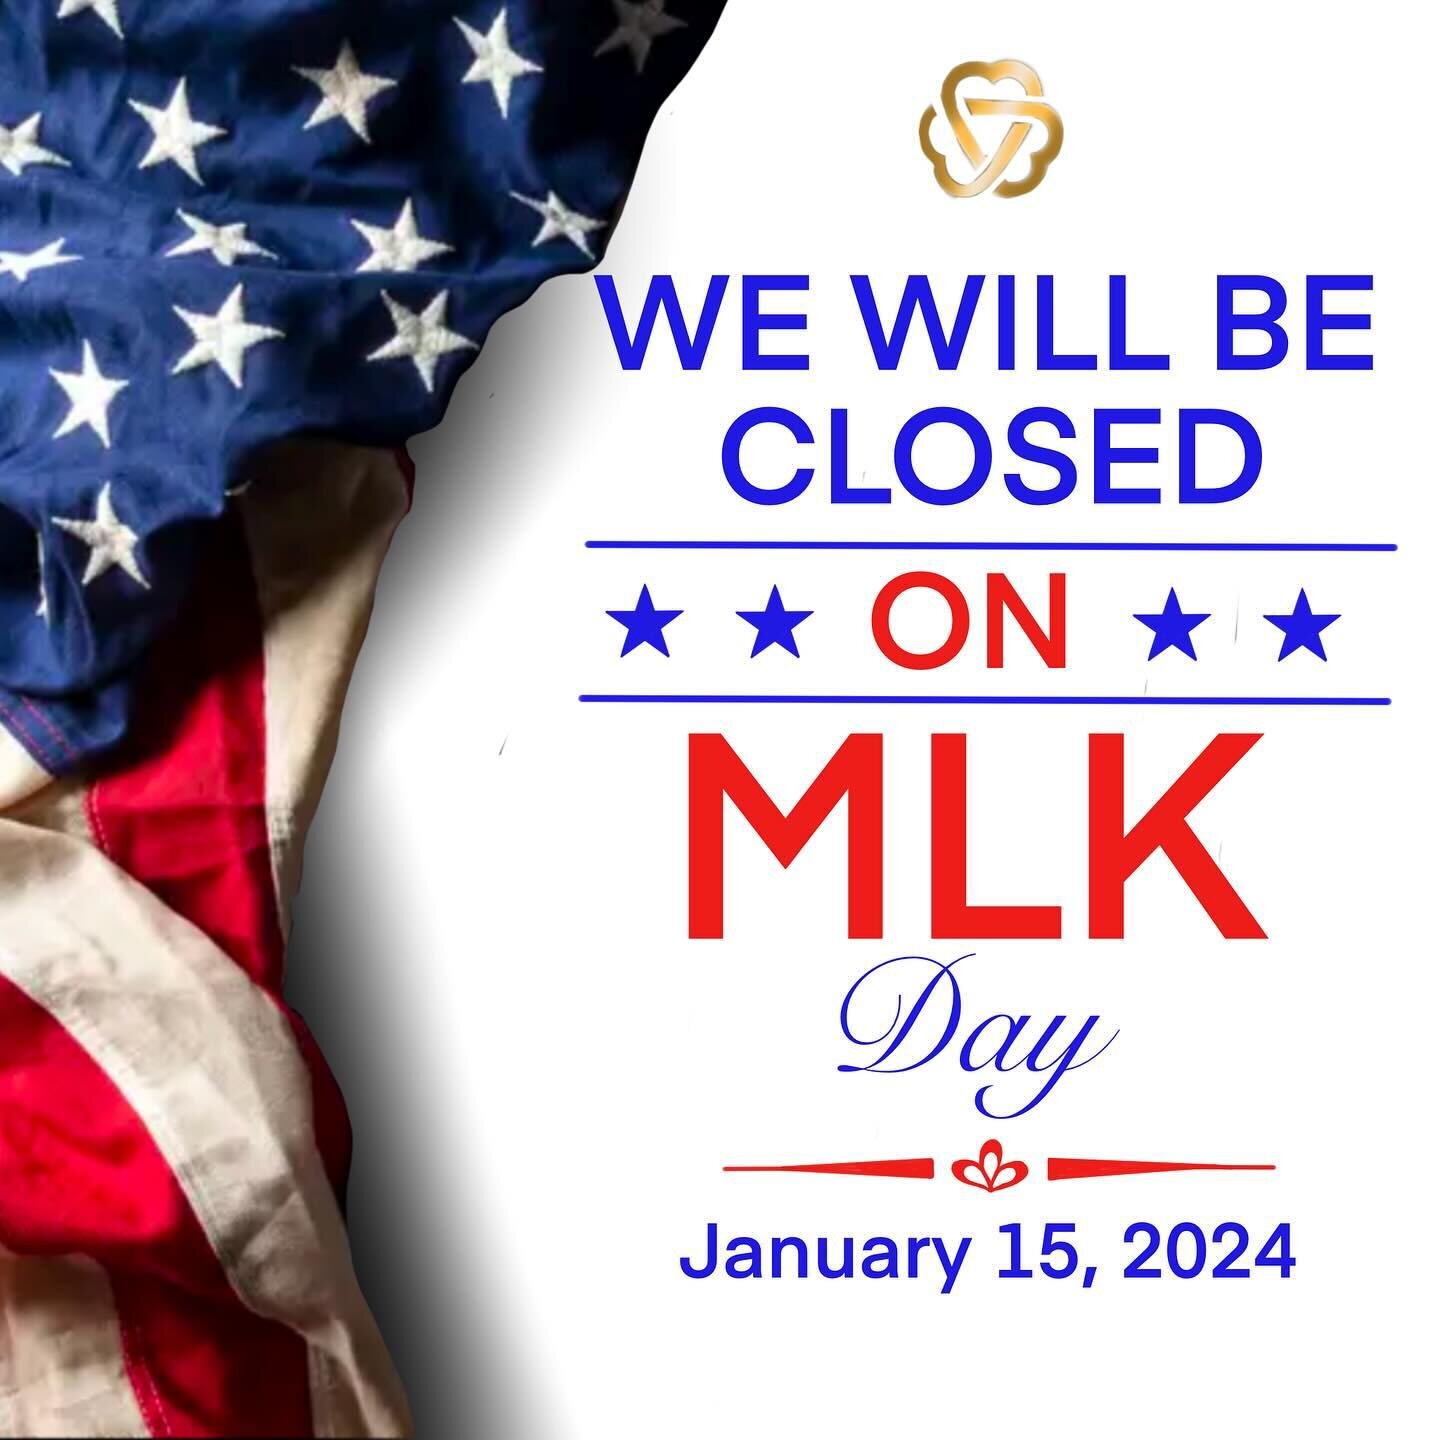 All locations will be closed today. Monday, January 15th